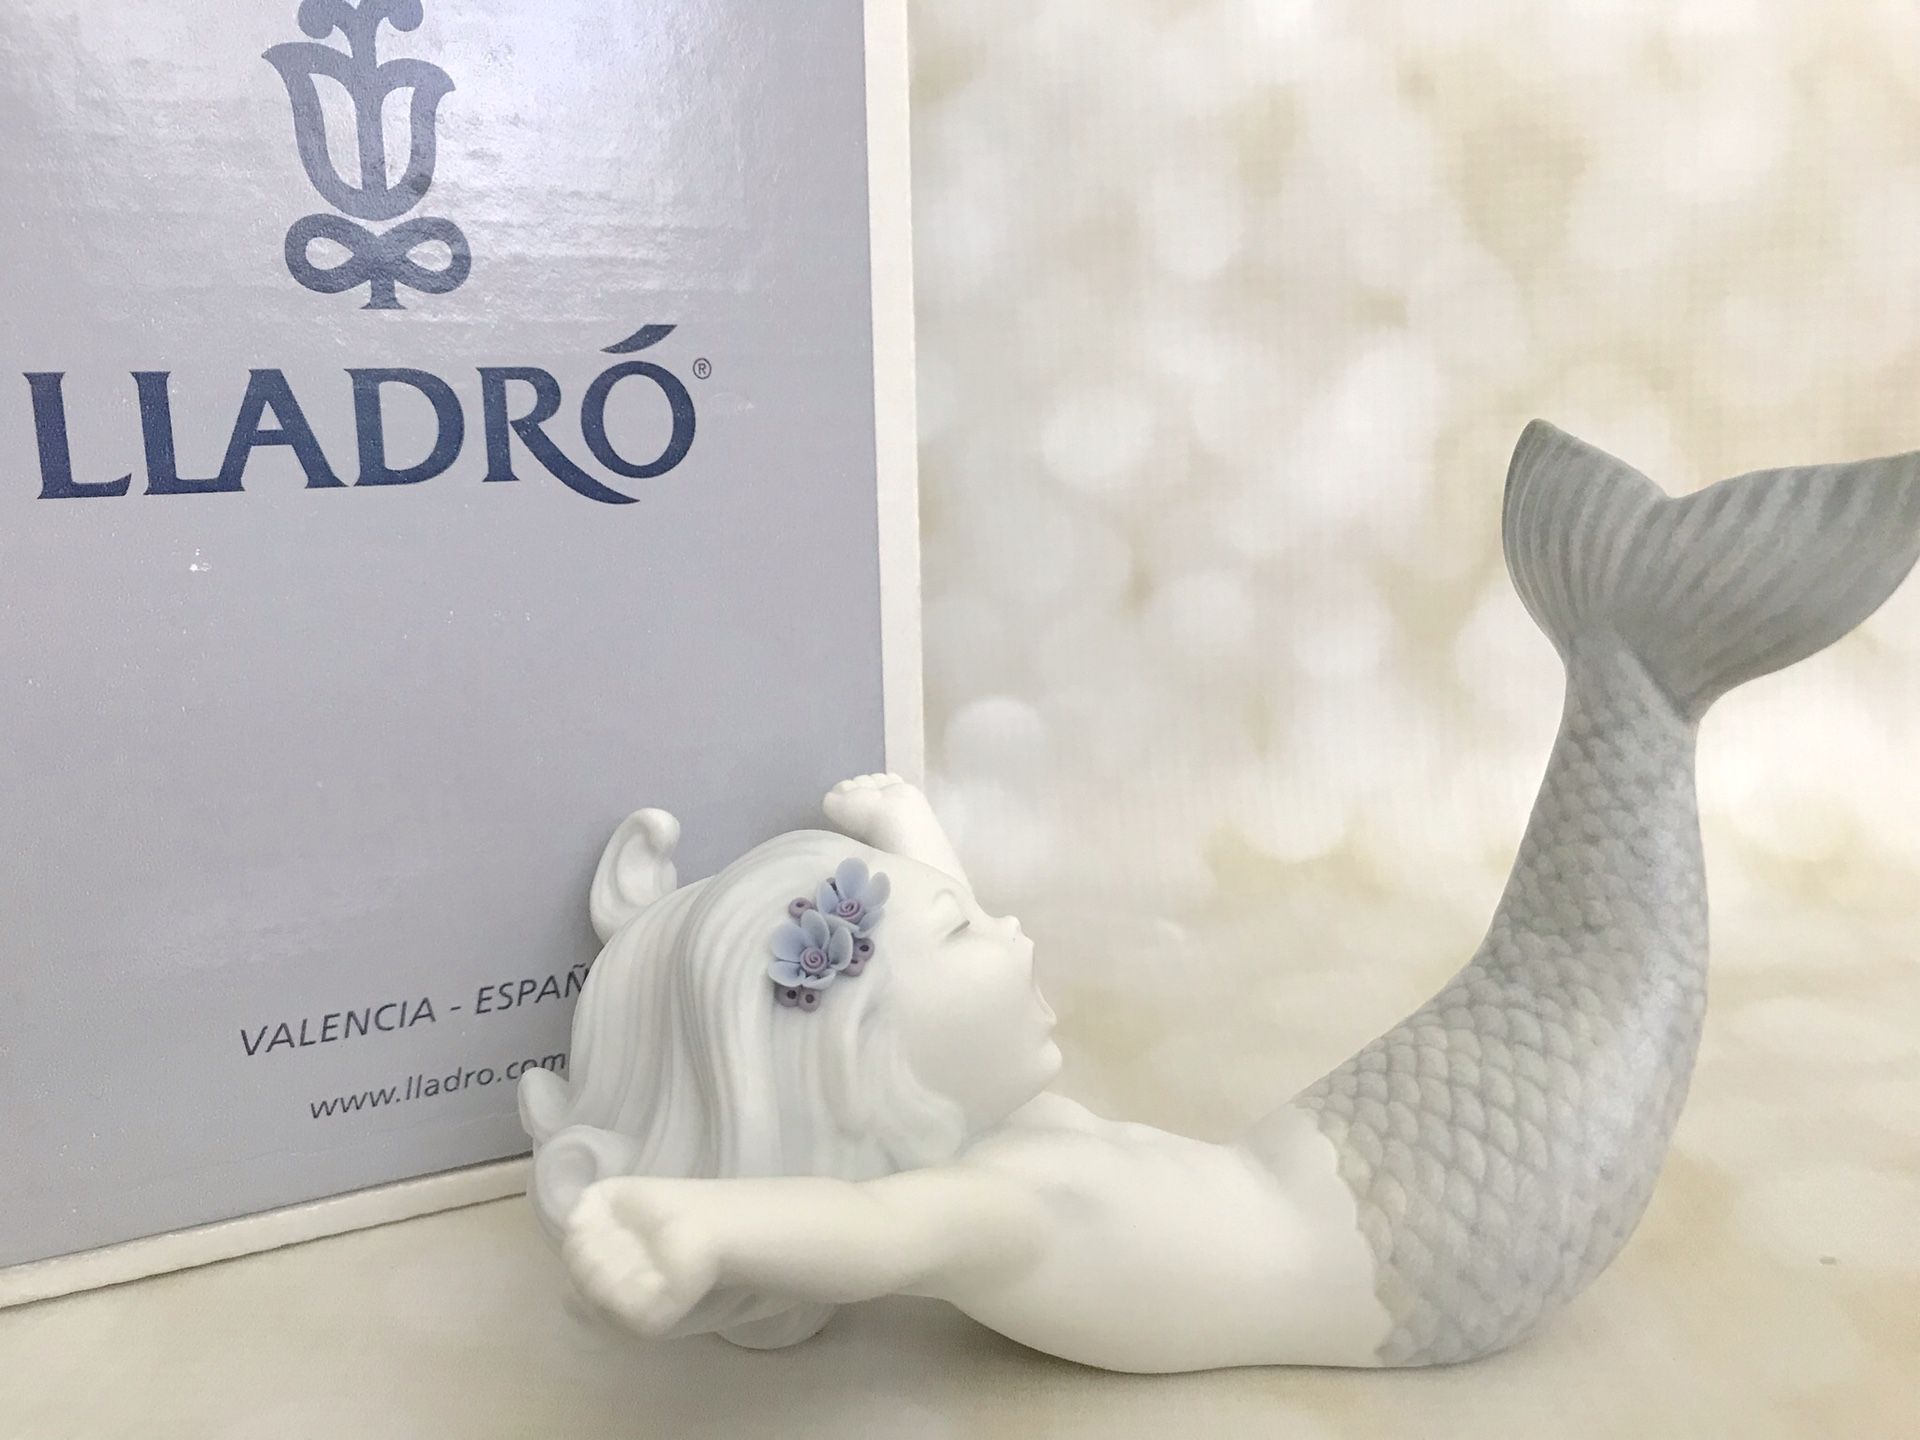 Mermaid waking up at sea (matte) porcelain figurine by Lladro #18113